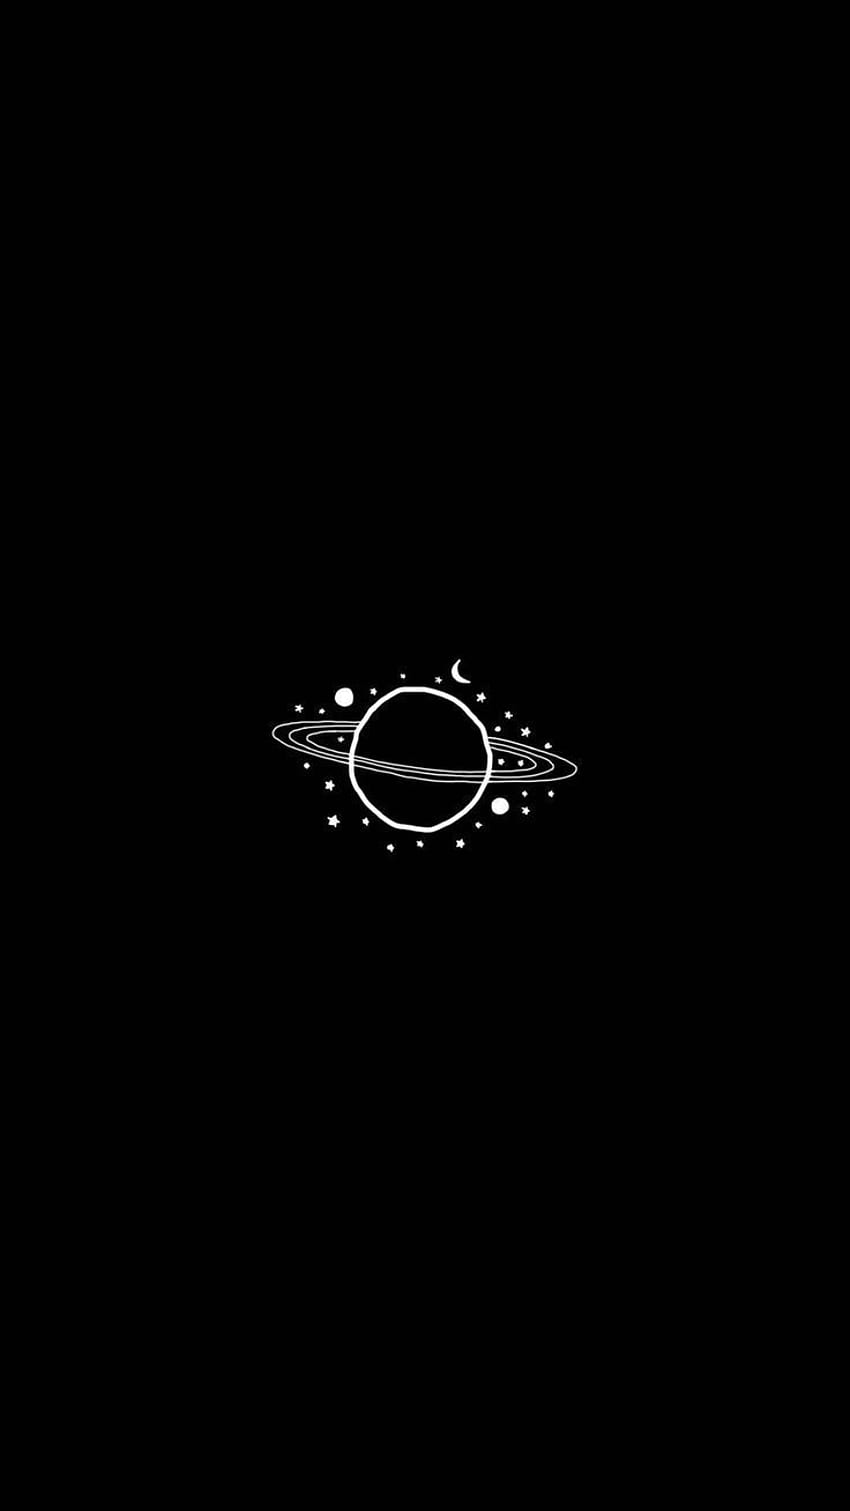 Black background with a white circle in the middle with stars and a moon - Black